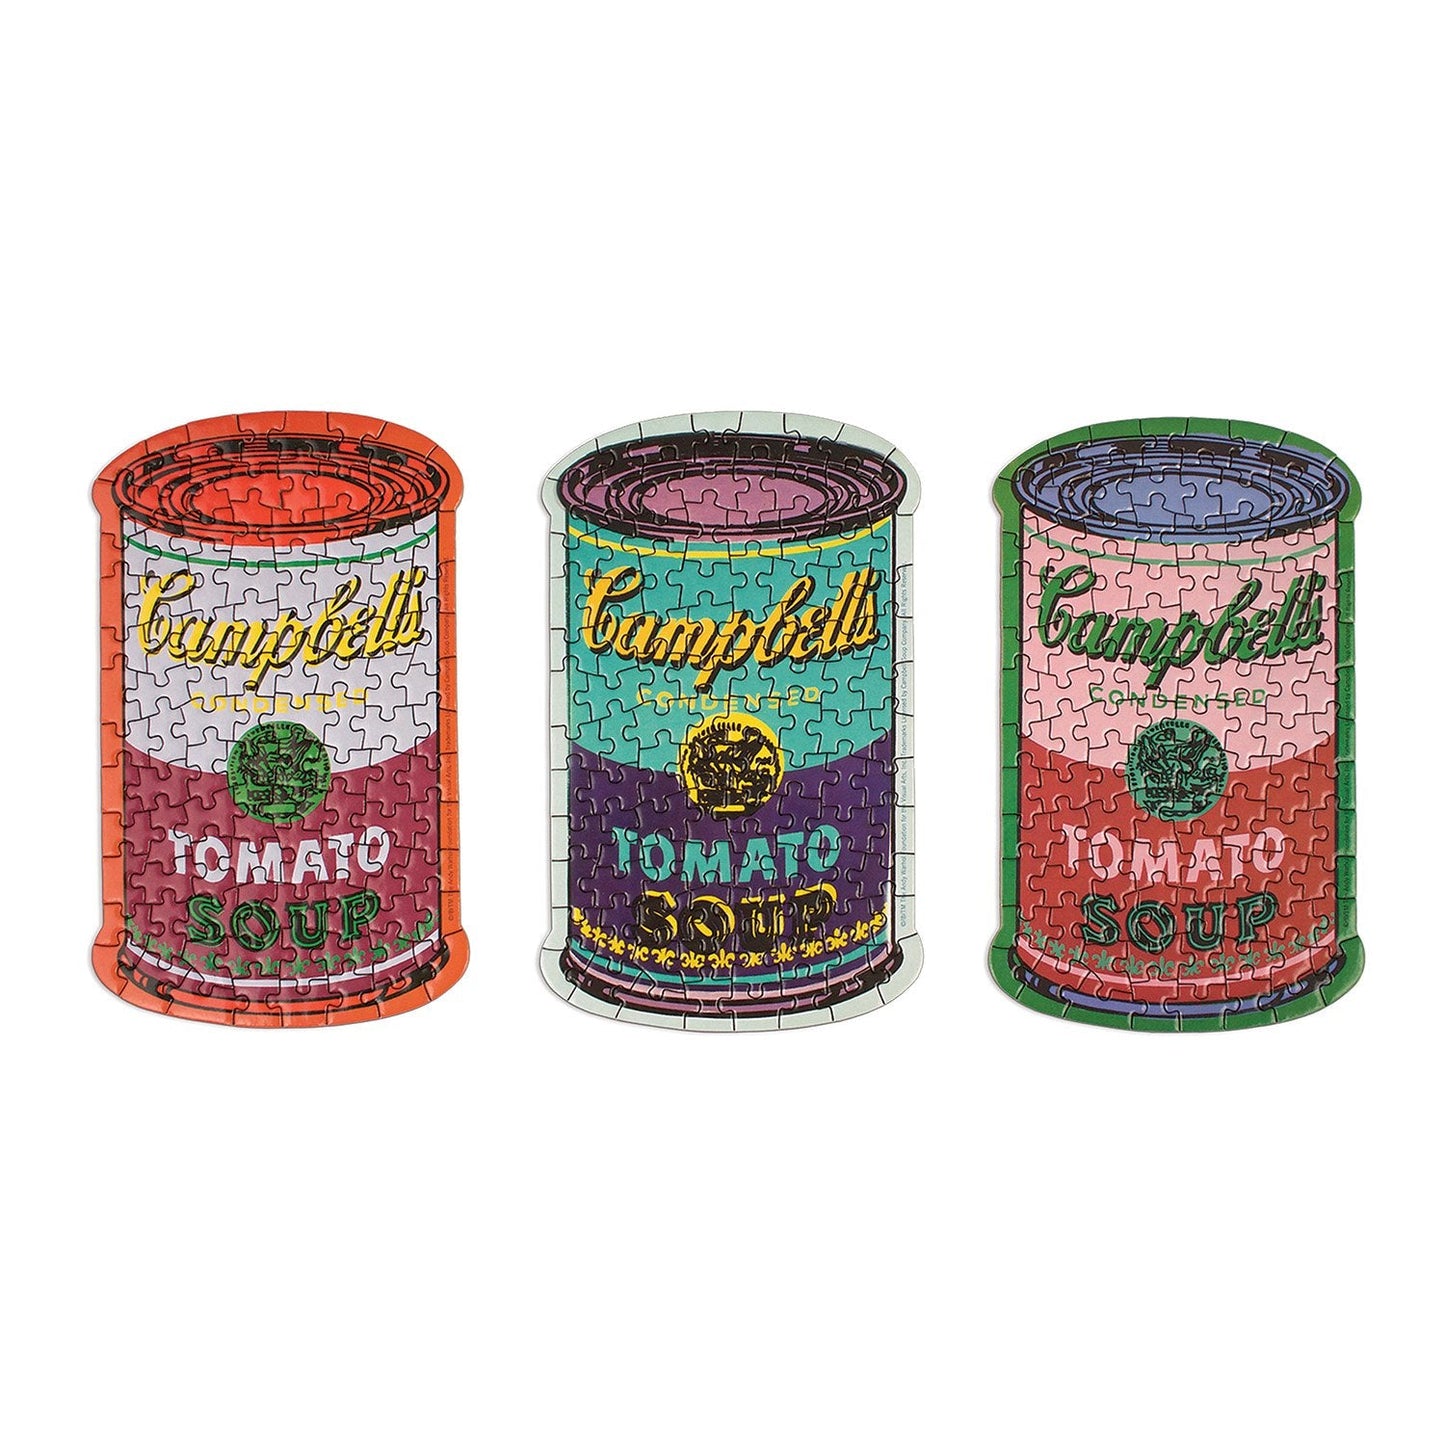 Andy Warhol Soup Cans Set of 3 Shaped Puzzles in Tins